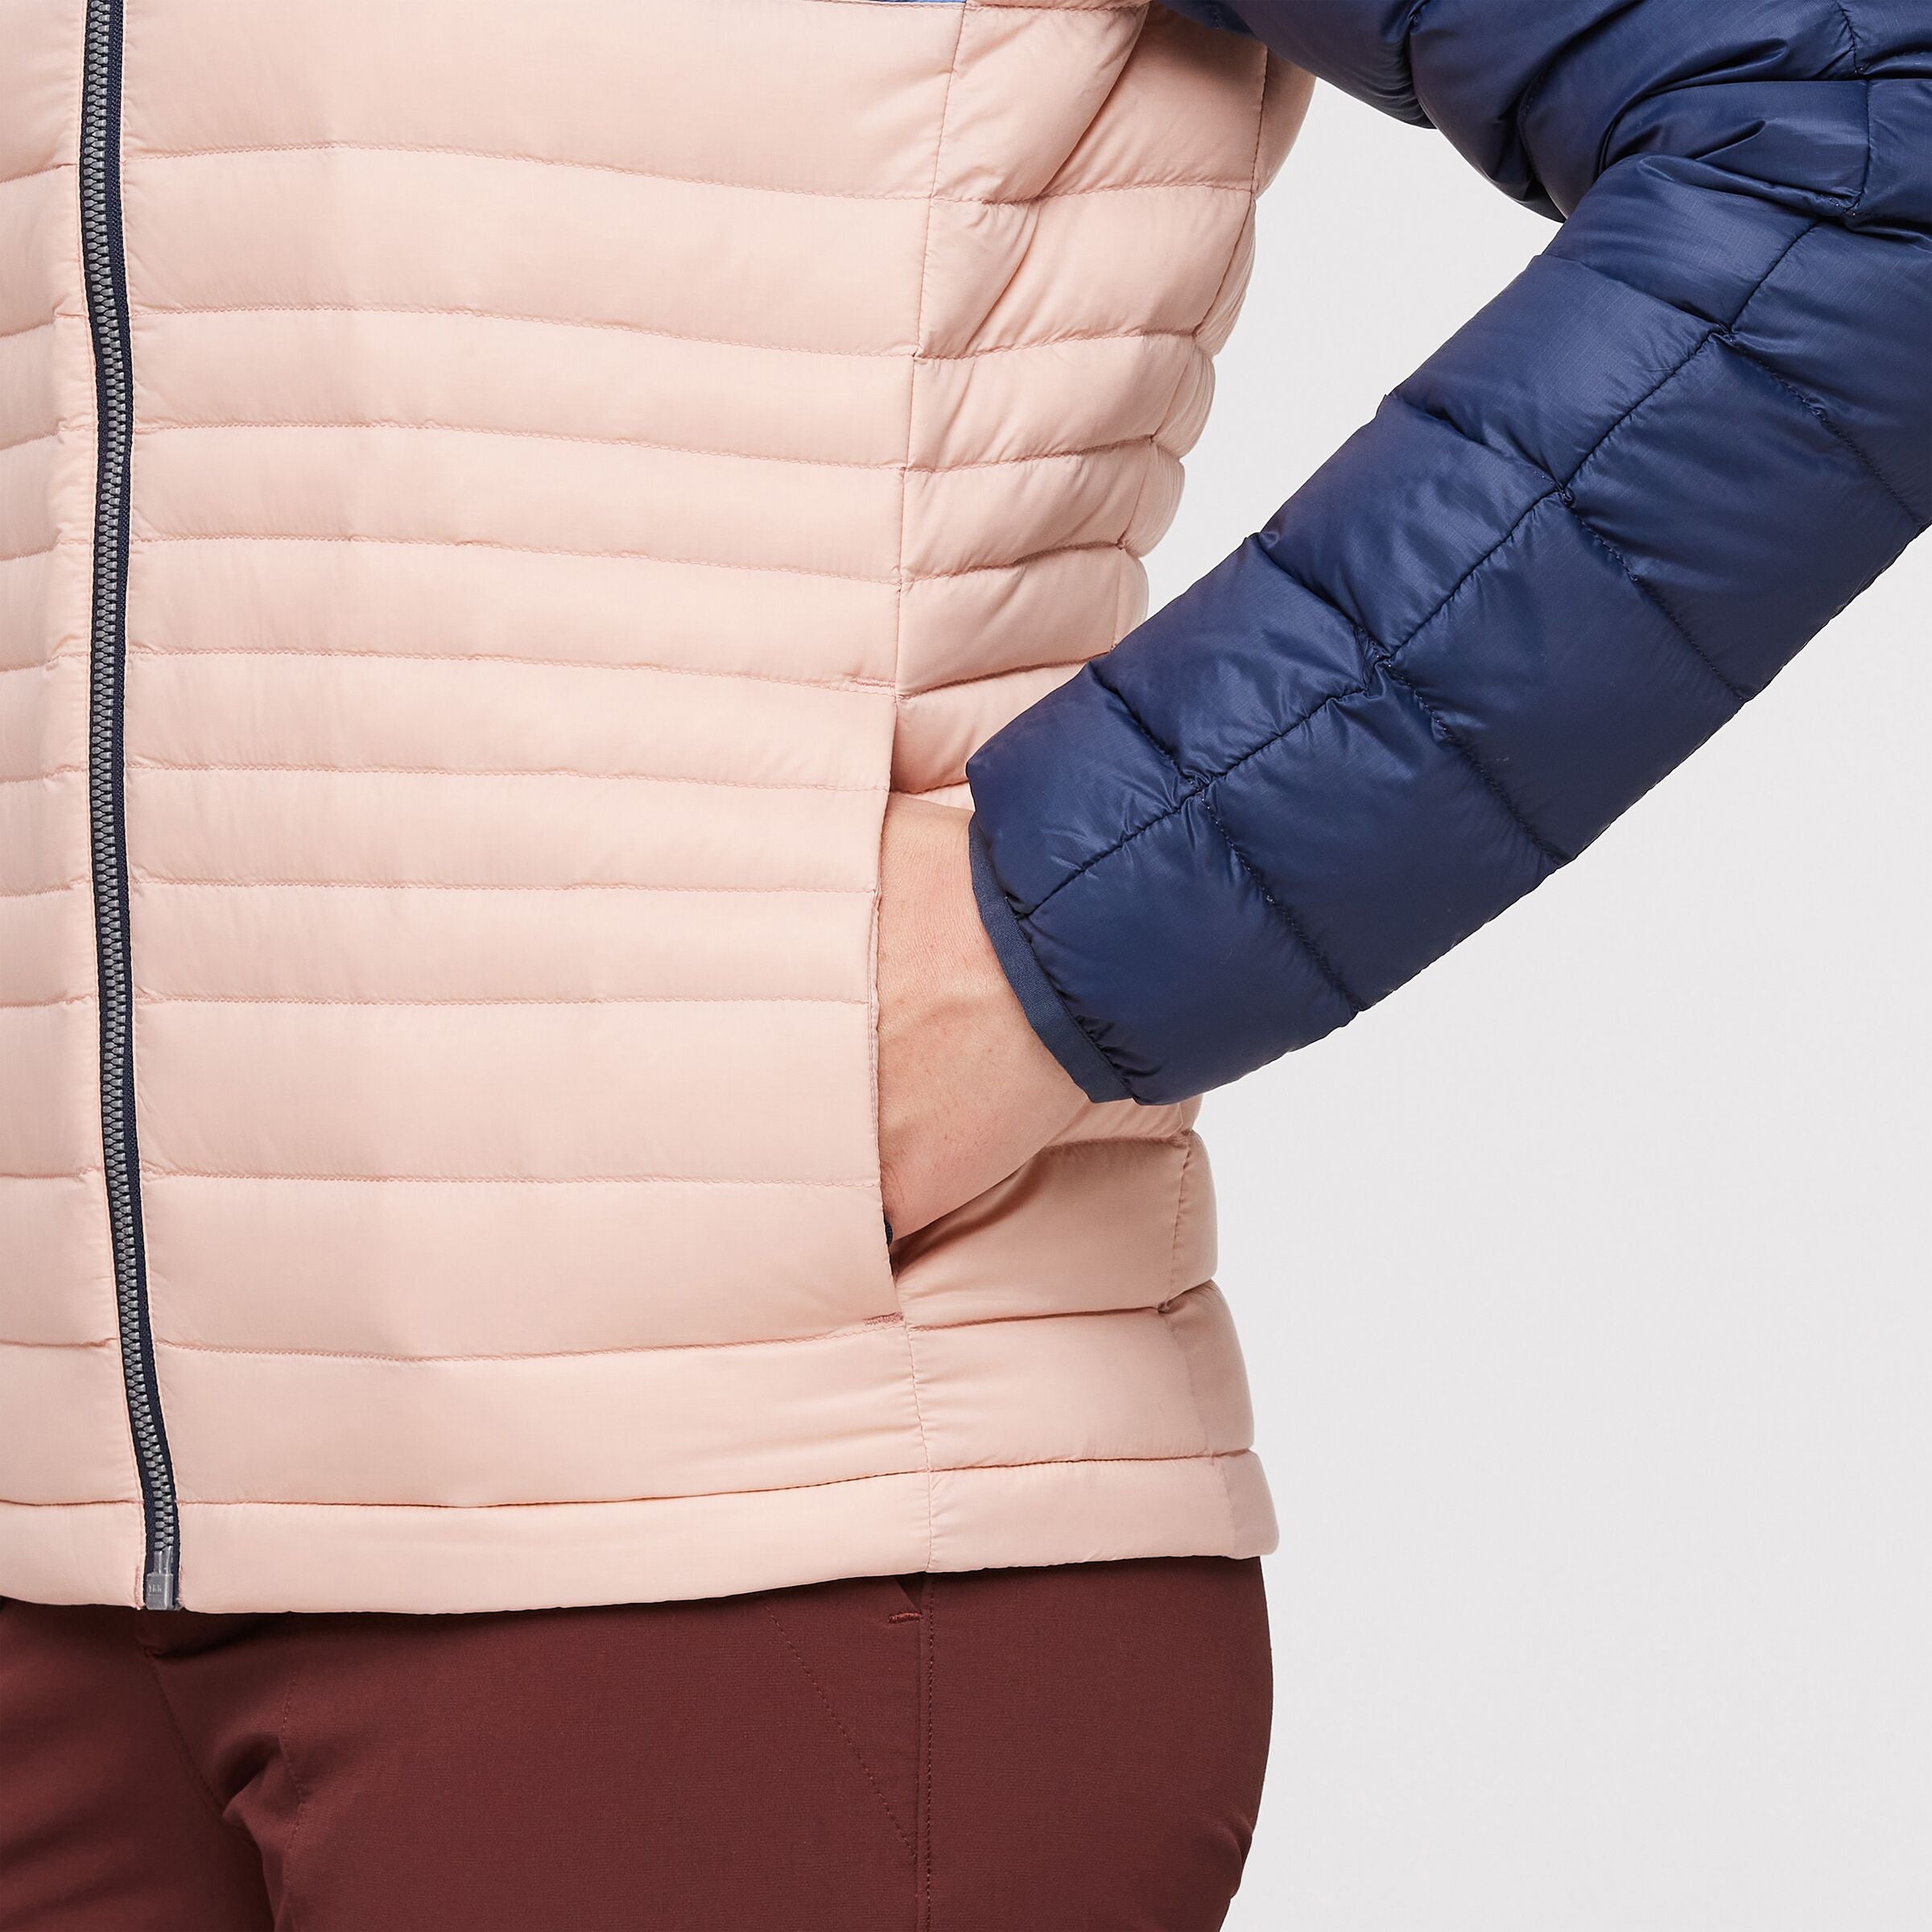 Fuego Hooded Down Jacket - Women's, Ink/Rosewood